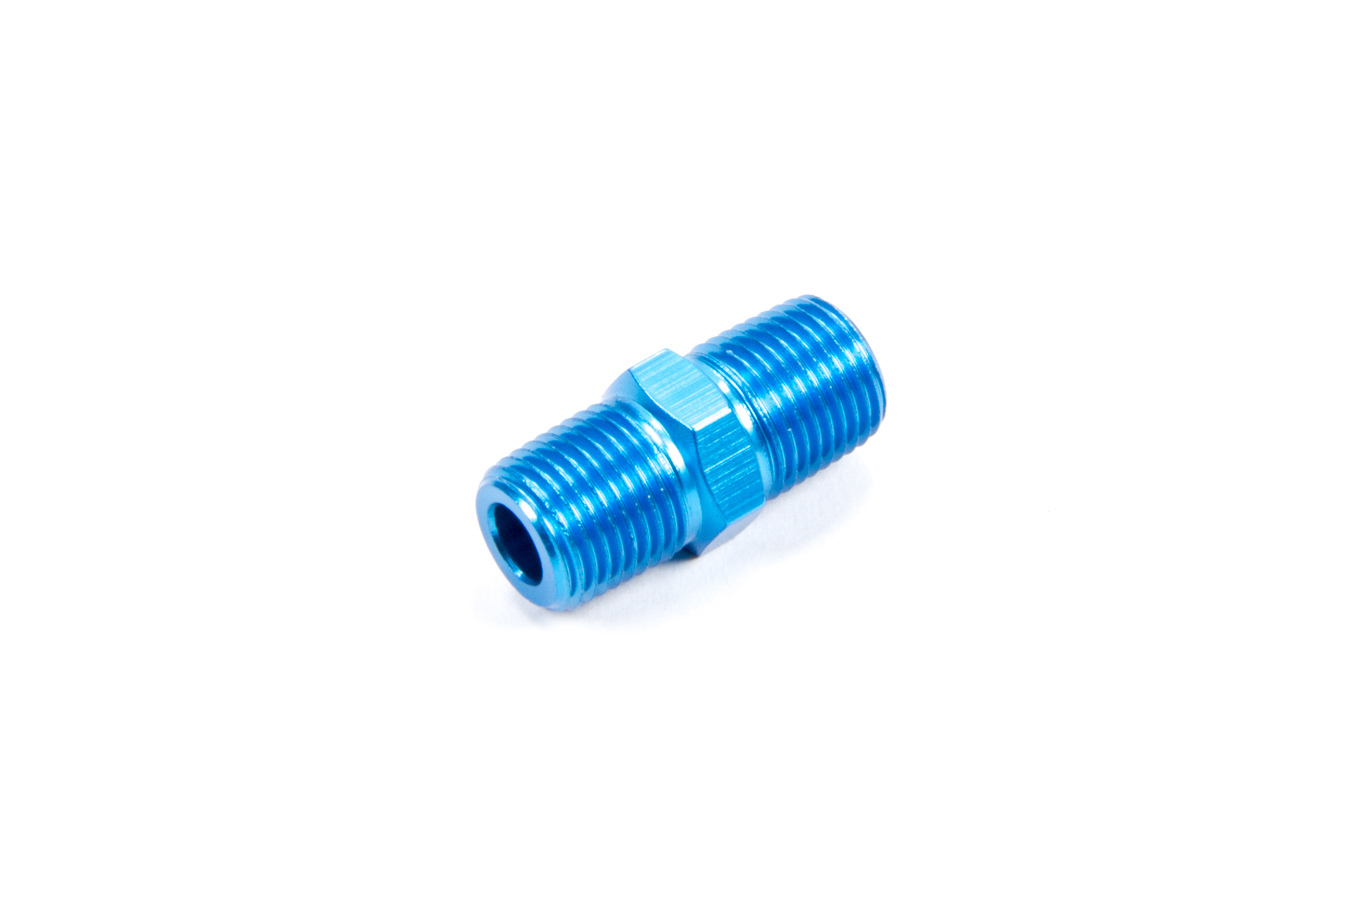 Fragola 491101 Fitting, Adapter, Straight, 1/8 in NPT Male to 1/8 in NPT Male, Aluminum, Blue Anodized, Each